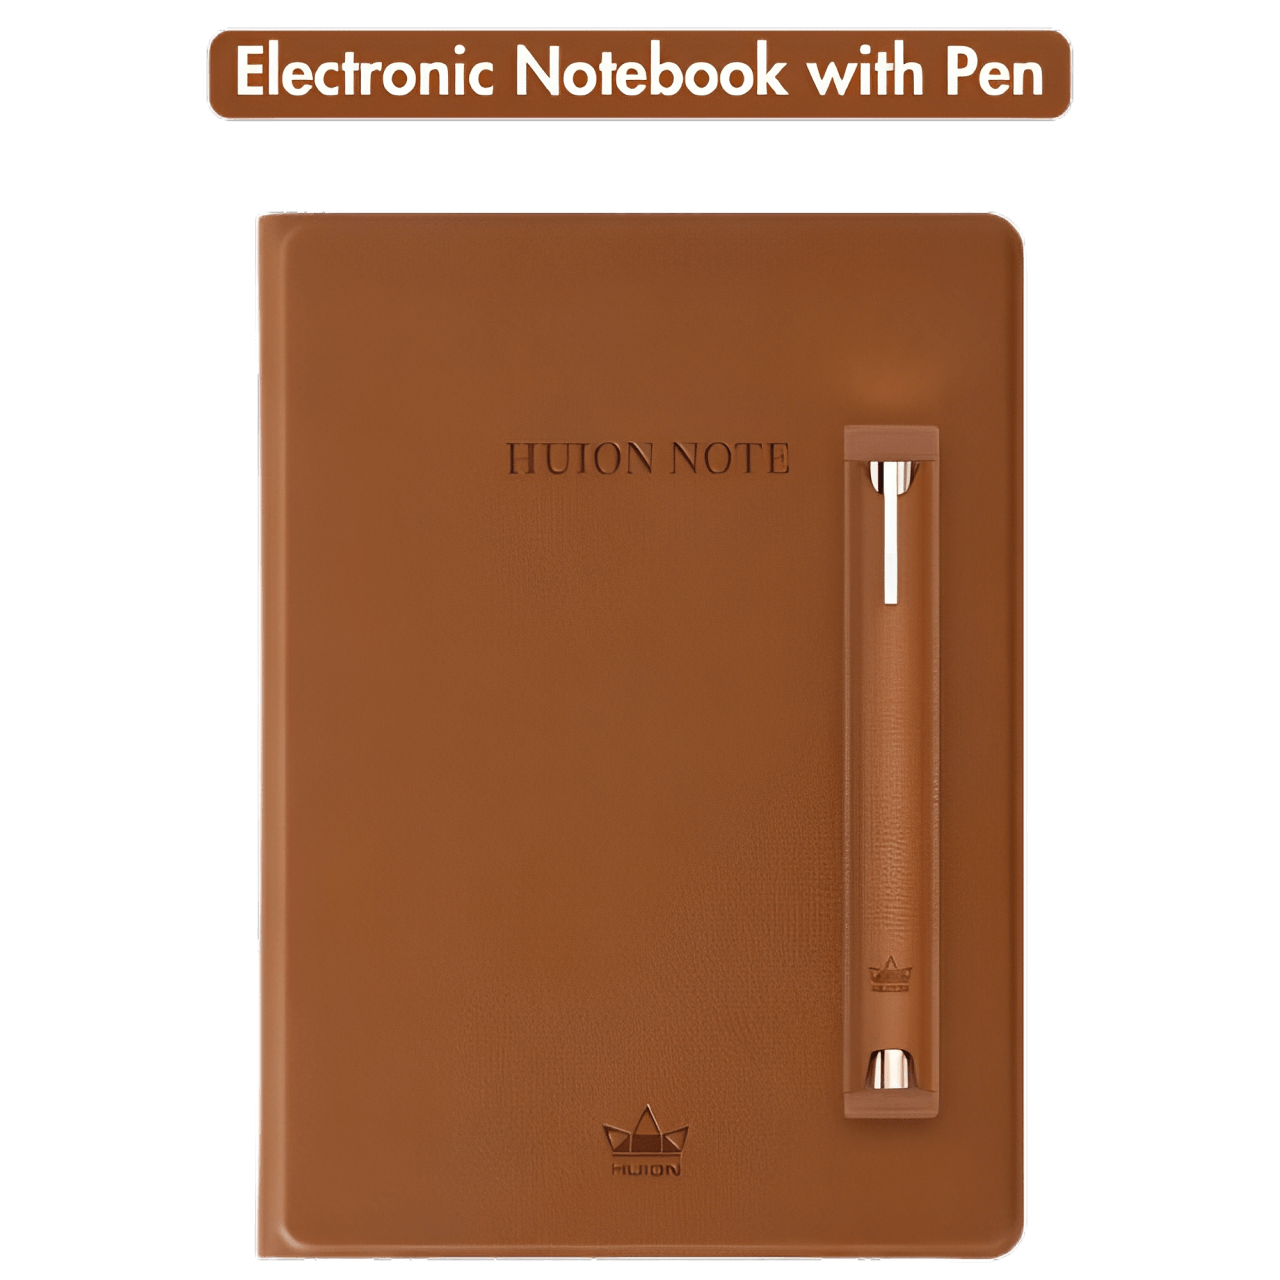 Electronic Notebook with Pen